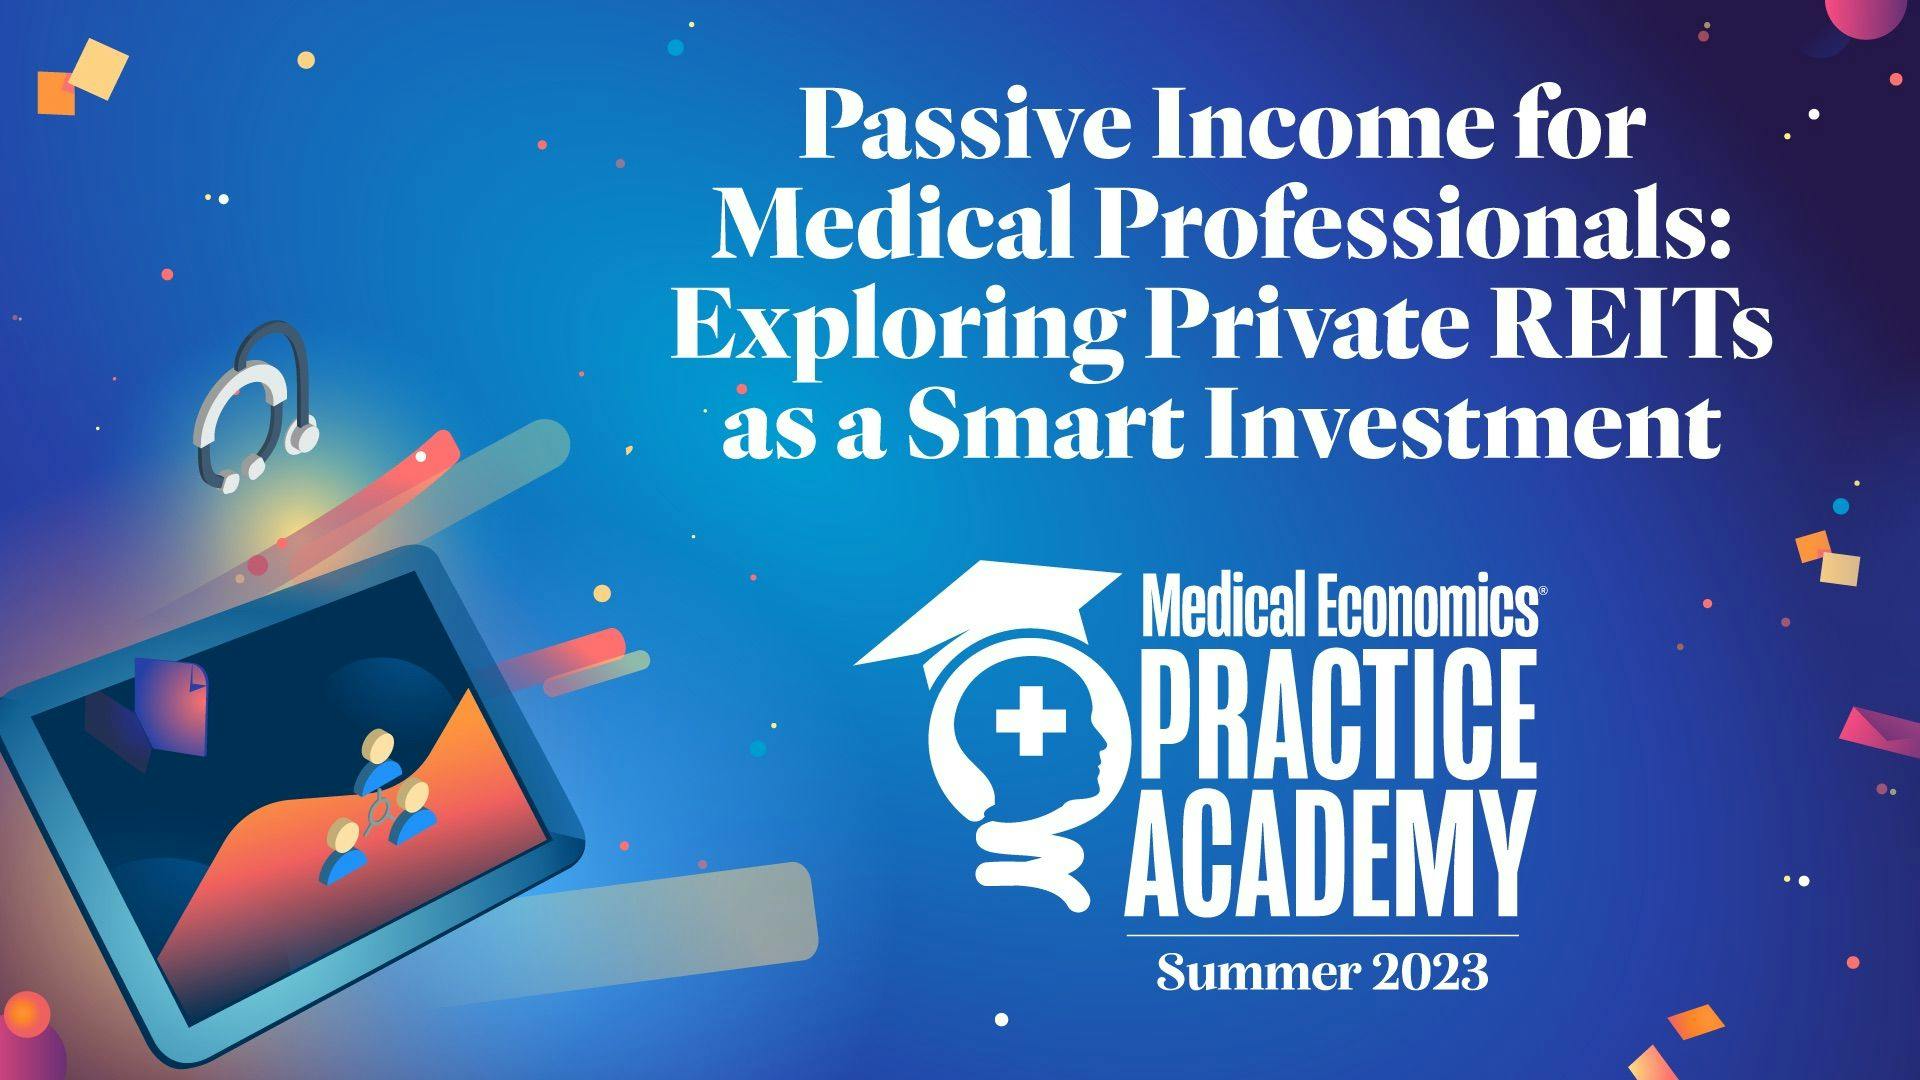 Passive Income for Medical Professionals: Exploring Private REITs as a Smart Investment